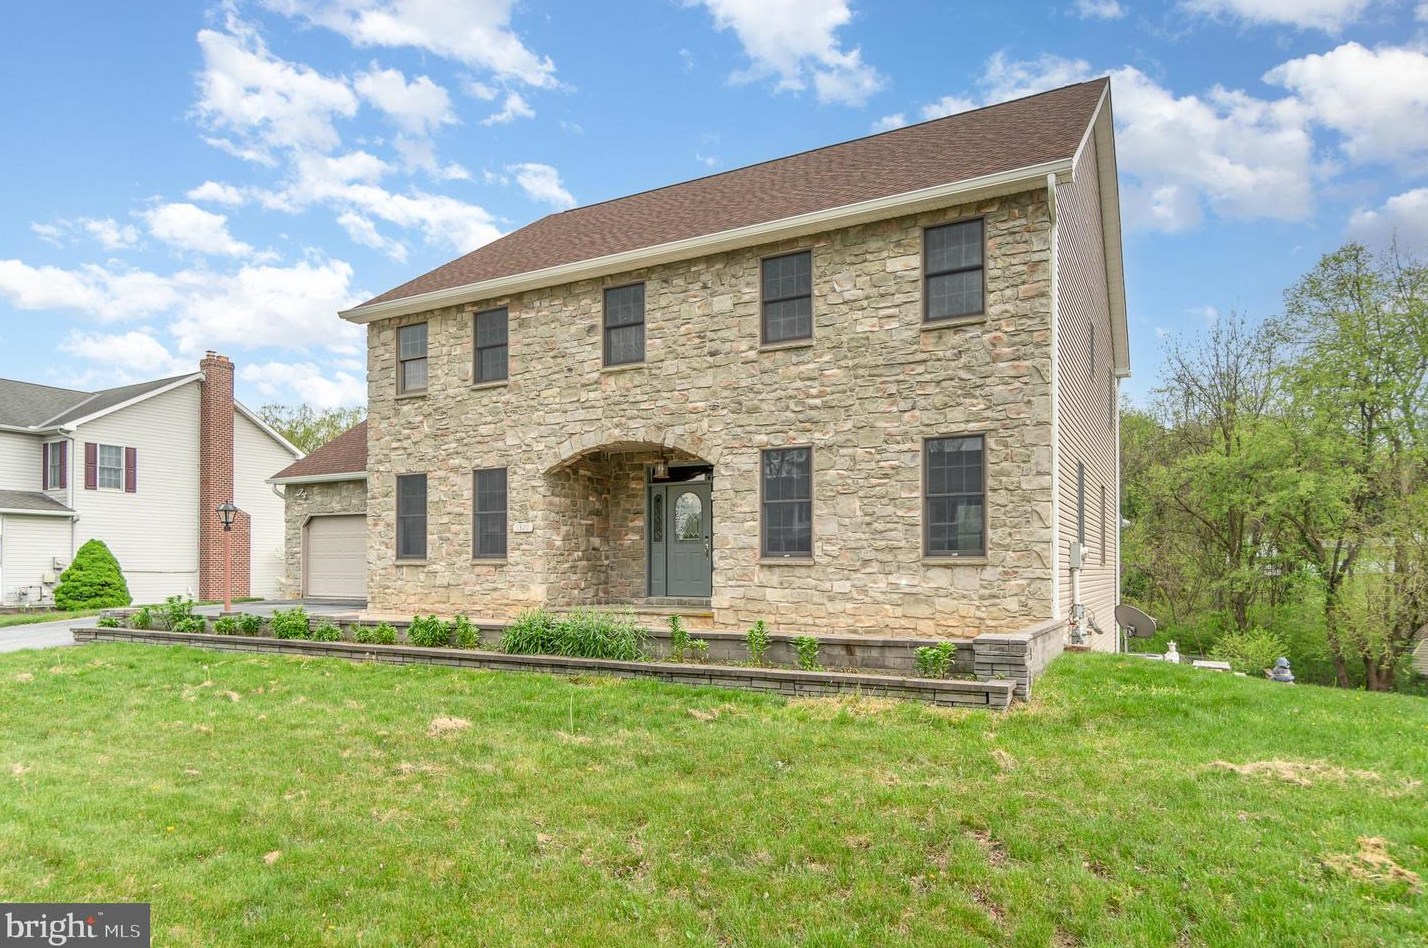 1320 Carriage House Rd, Hbg Inter Airp, PA 17057